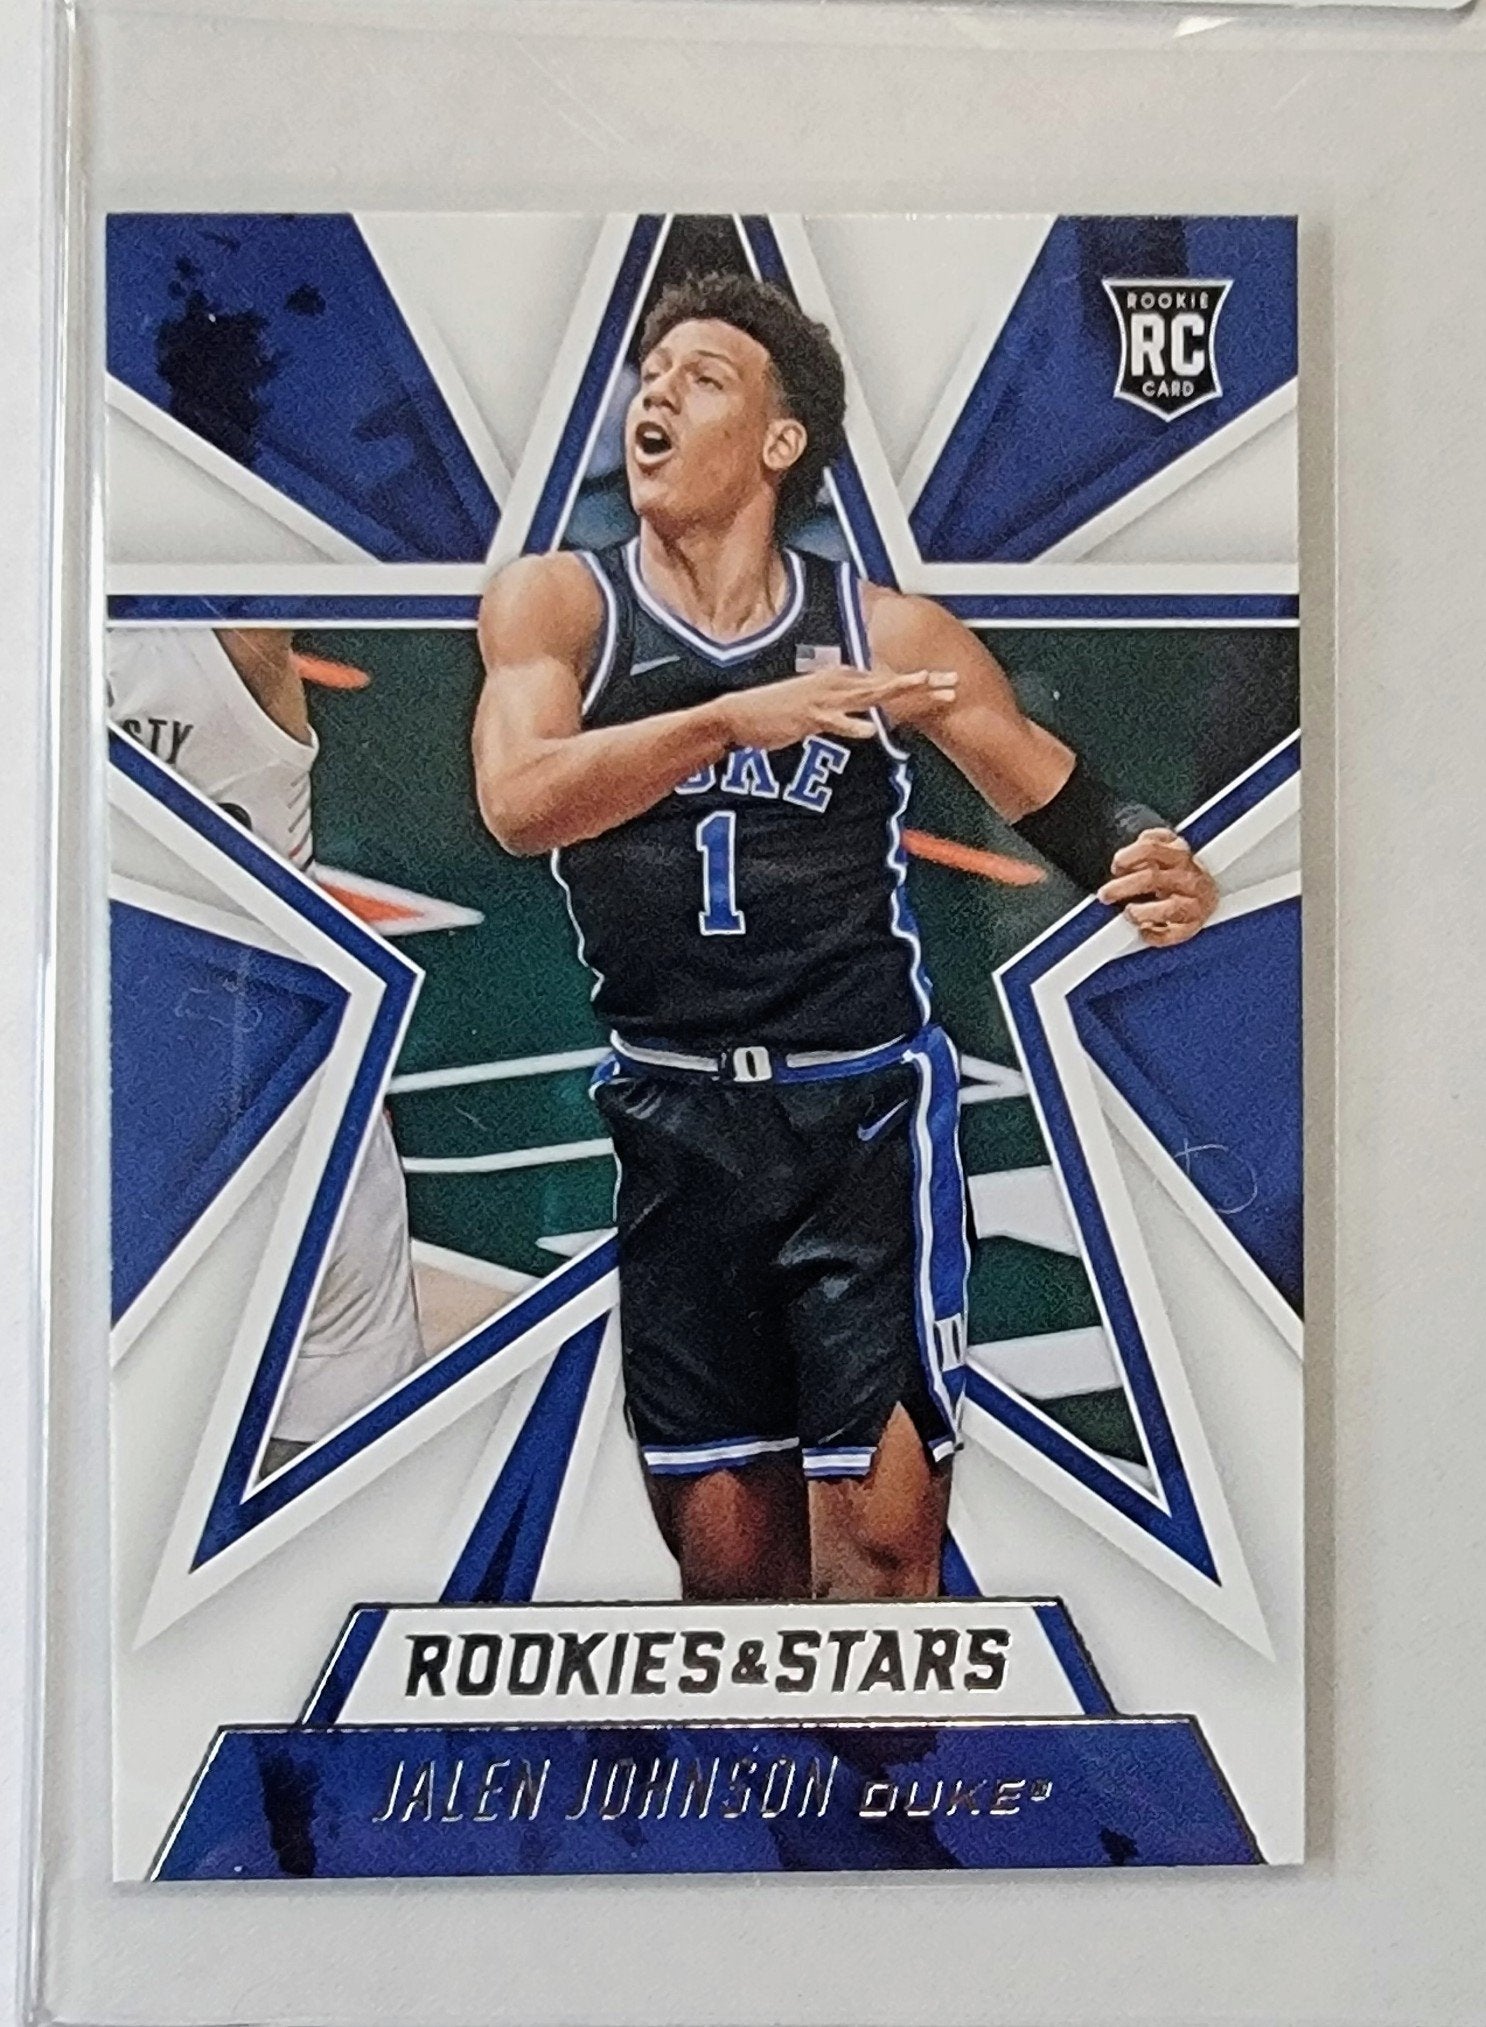 2021 Panini Chronicles Draft Picks Jalen Johnson Rookies and Stars Rookie Basketball Card AVM1 simple Xclusive Collectibles   